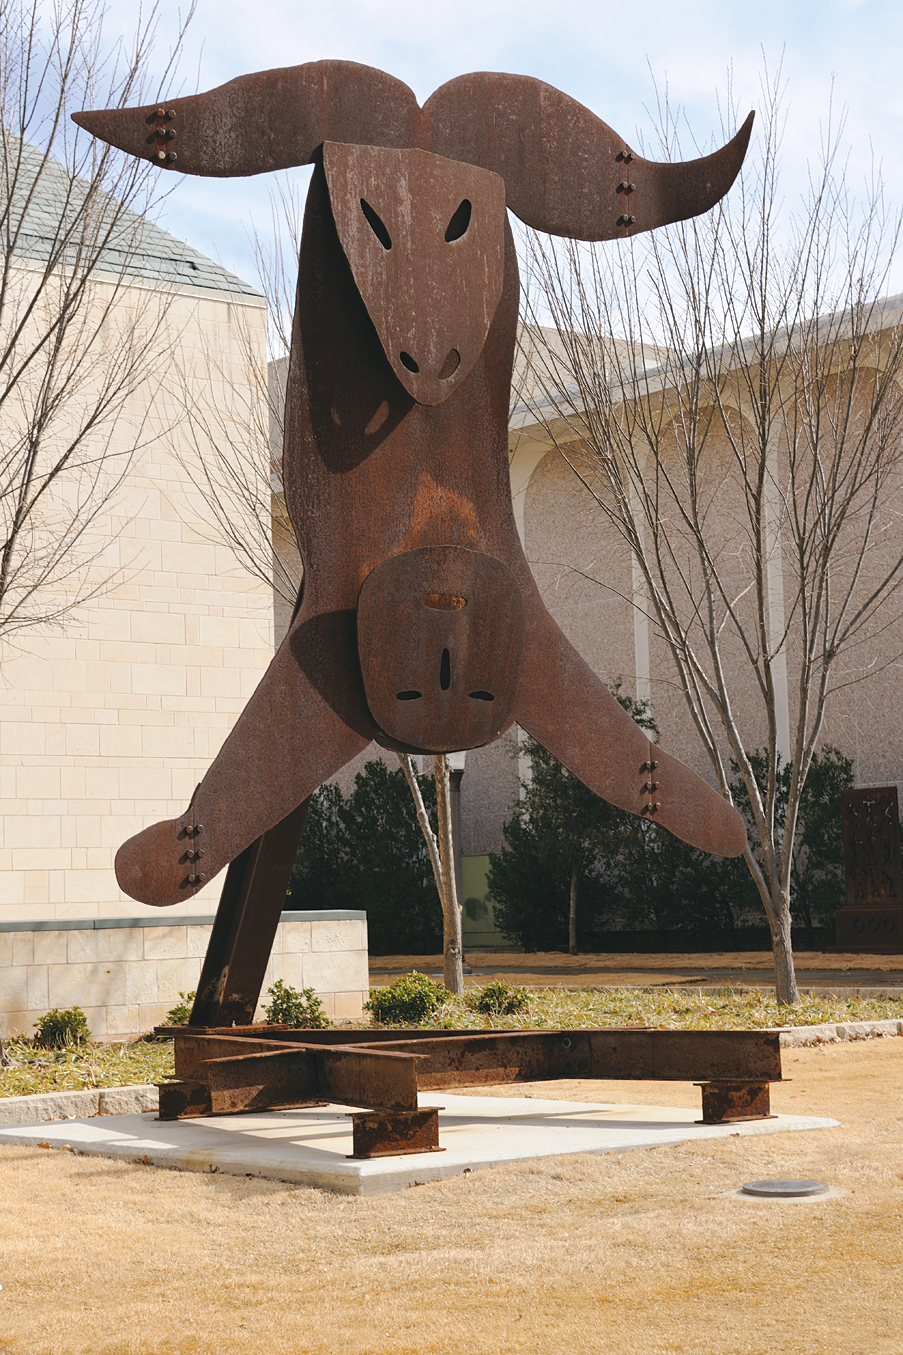 Steel sculpture on steel frame outside of building. Top of sculpture is the head of a sheep with horns and bottom of sculpture is stylized head and arms of a human figure.